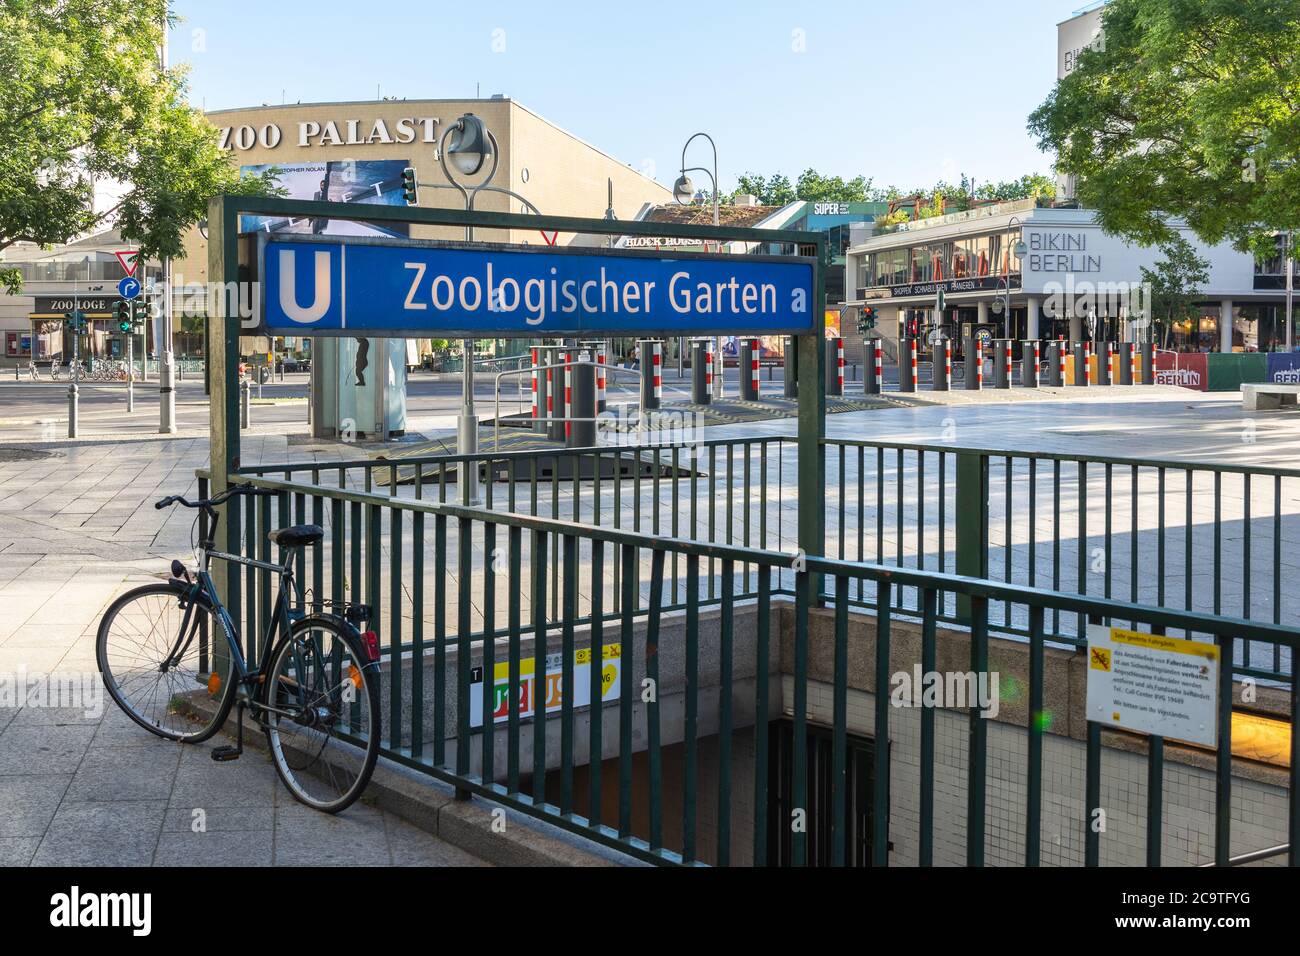 Subway entrance Zoologischer Garten in Berlin with a view of the Zoo-Palast cinema. Stock Photo